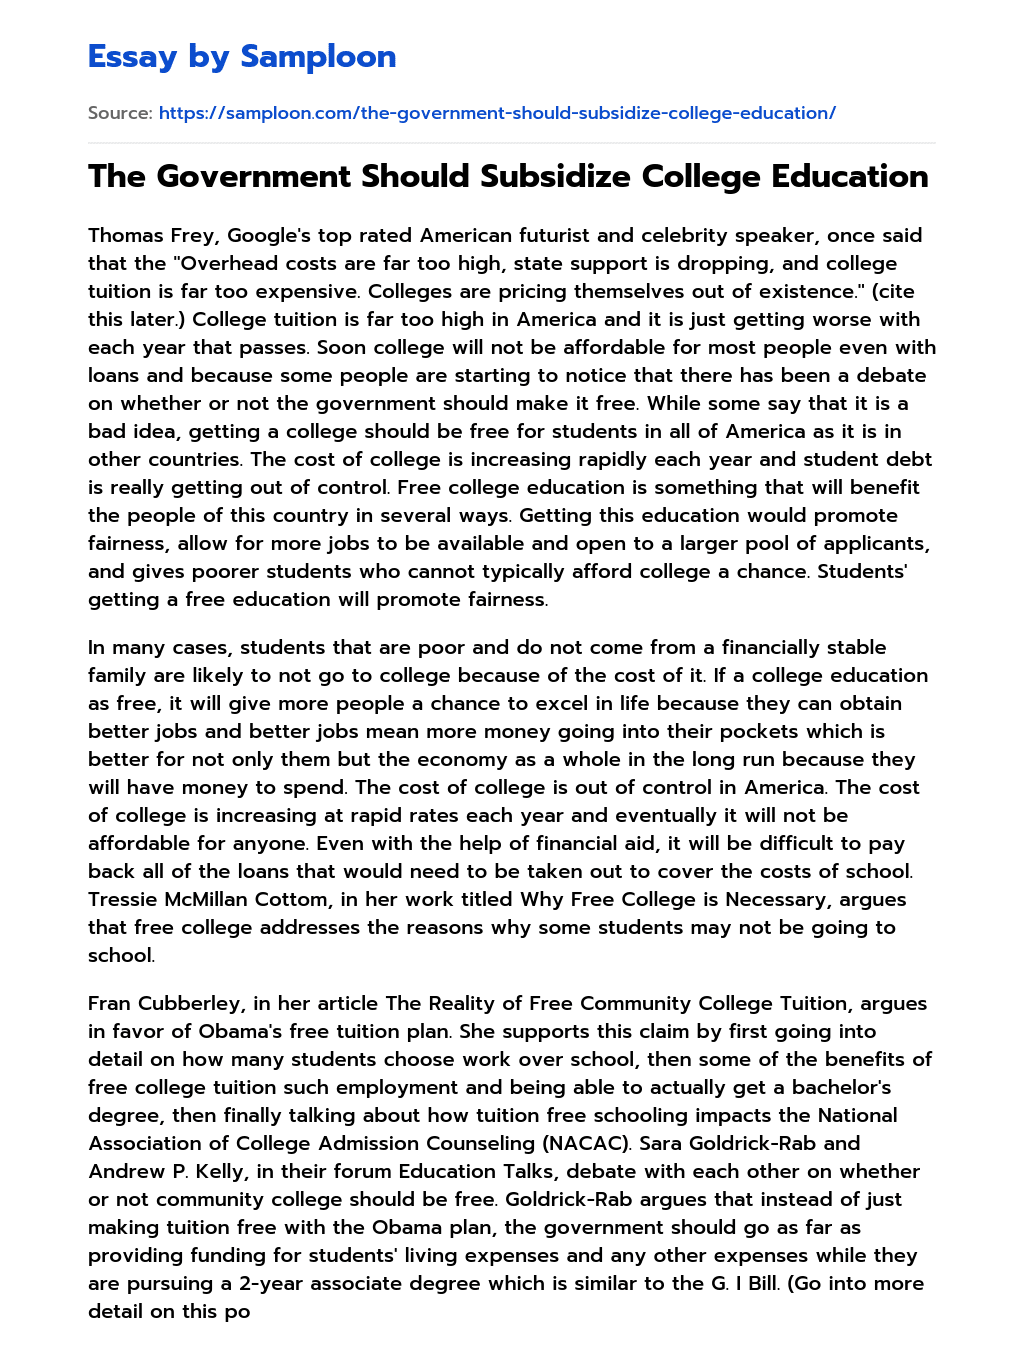 The Government Should Subsidize College Education essay